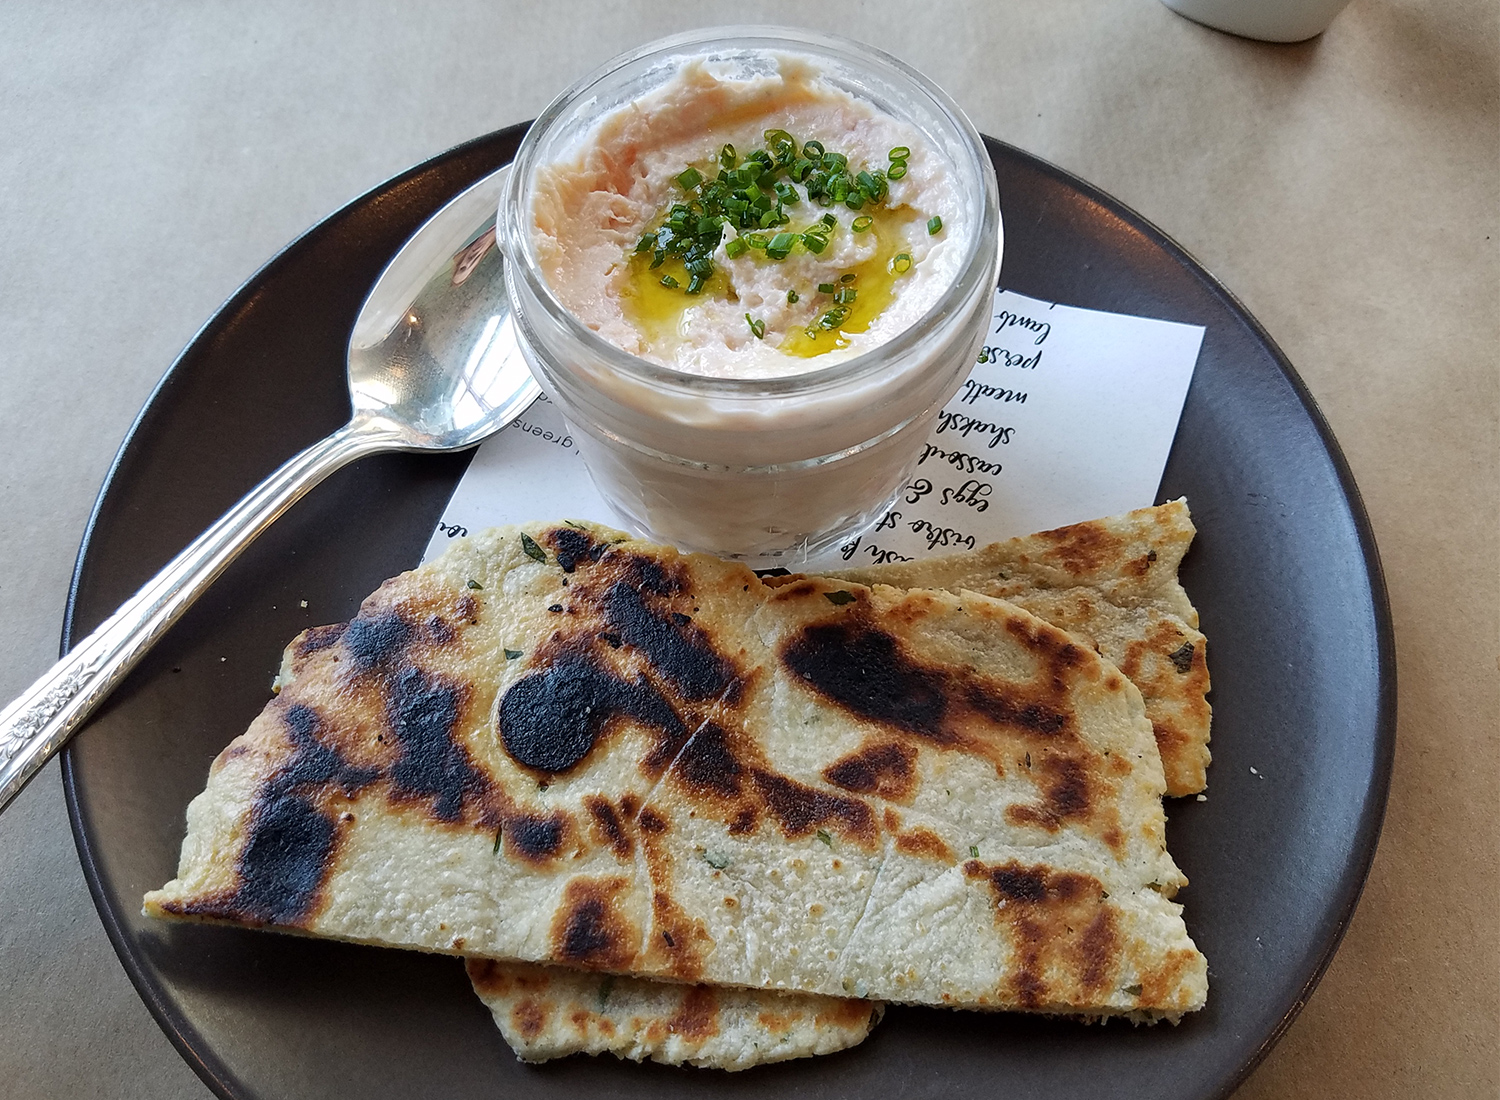 Smoked trout and house ricotta jar with semolina flatbread at Pearl in Petaluma. Heather Irwin/PD